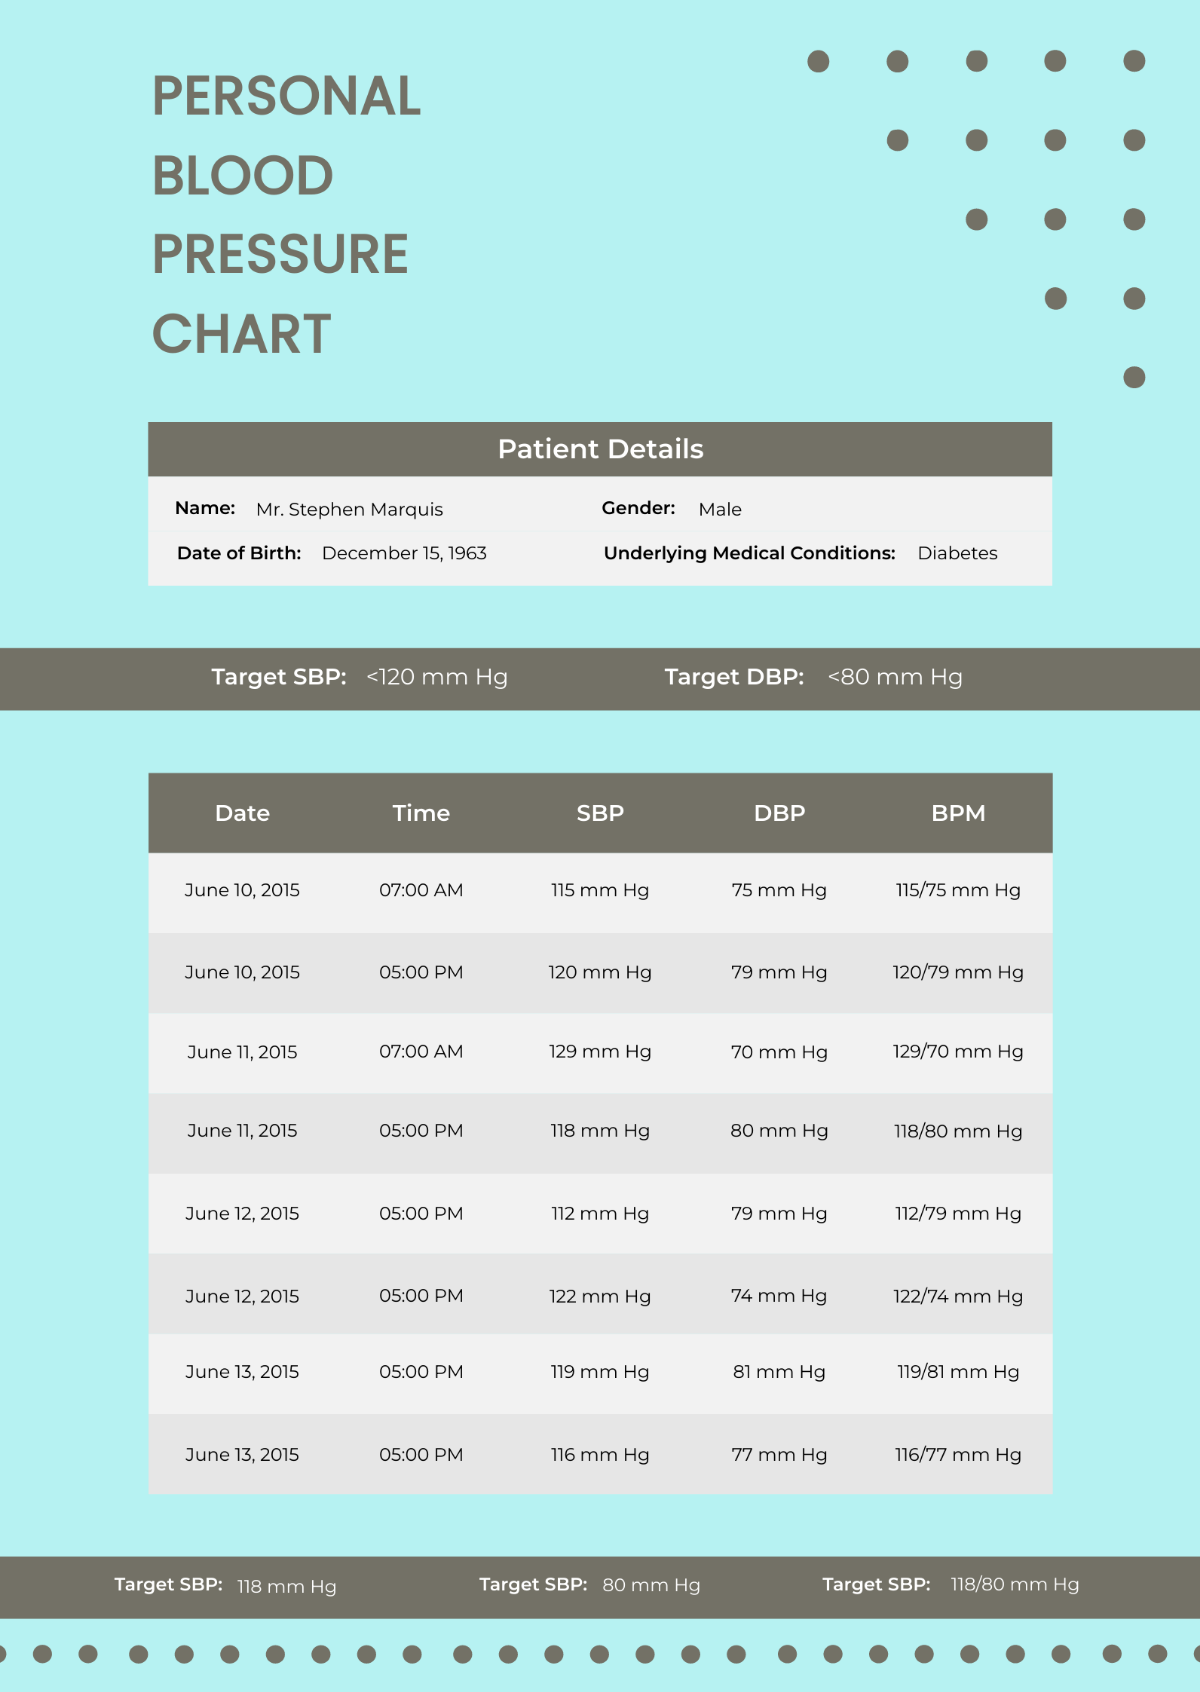 Personal Blood Pressure Chart template